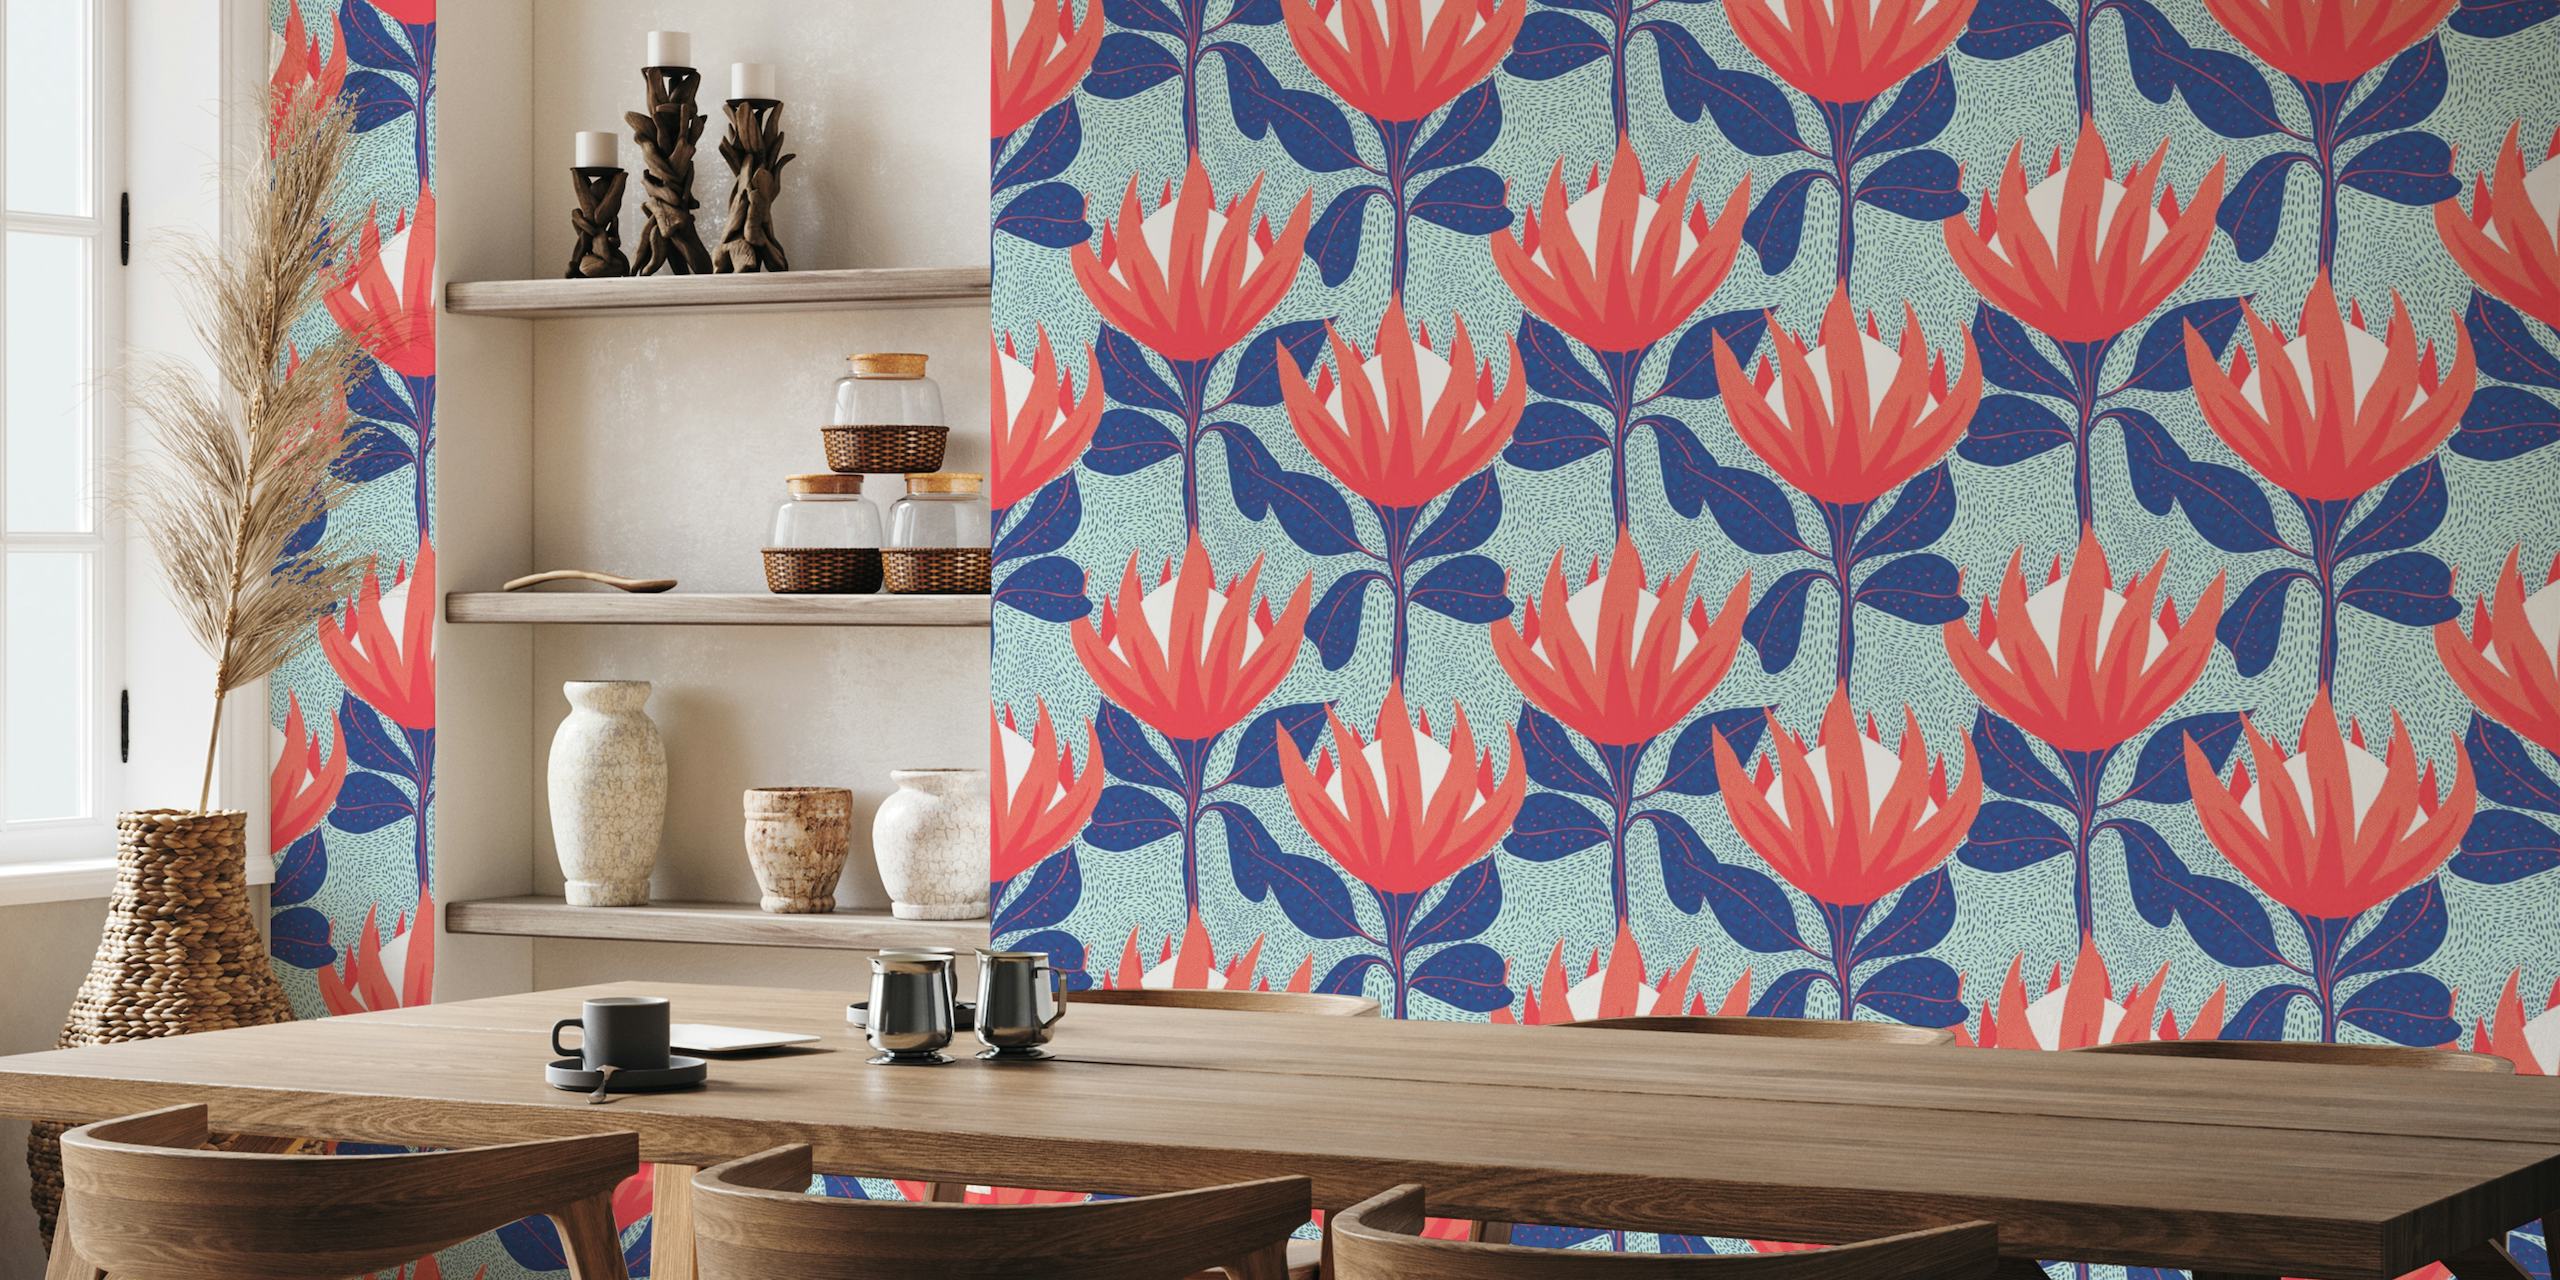 Protea Floral wall mural with coral pink flowers and deep blue leaves on a textured background